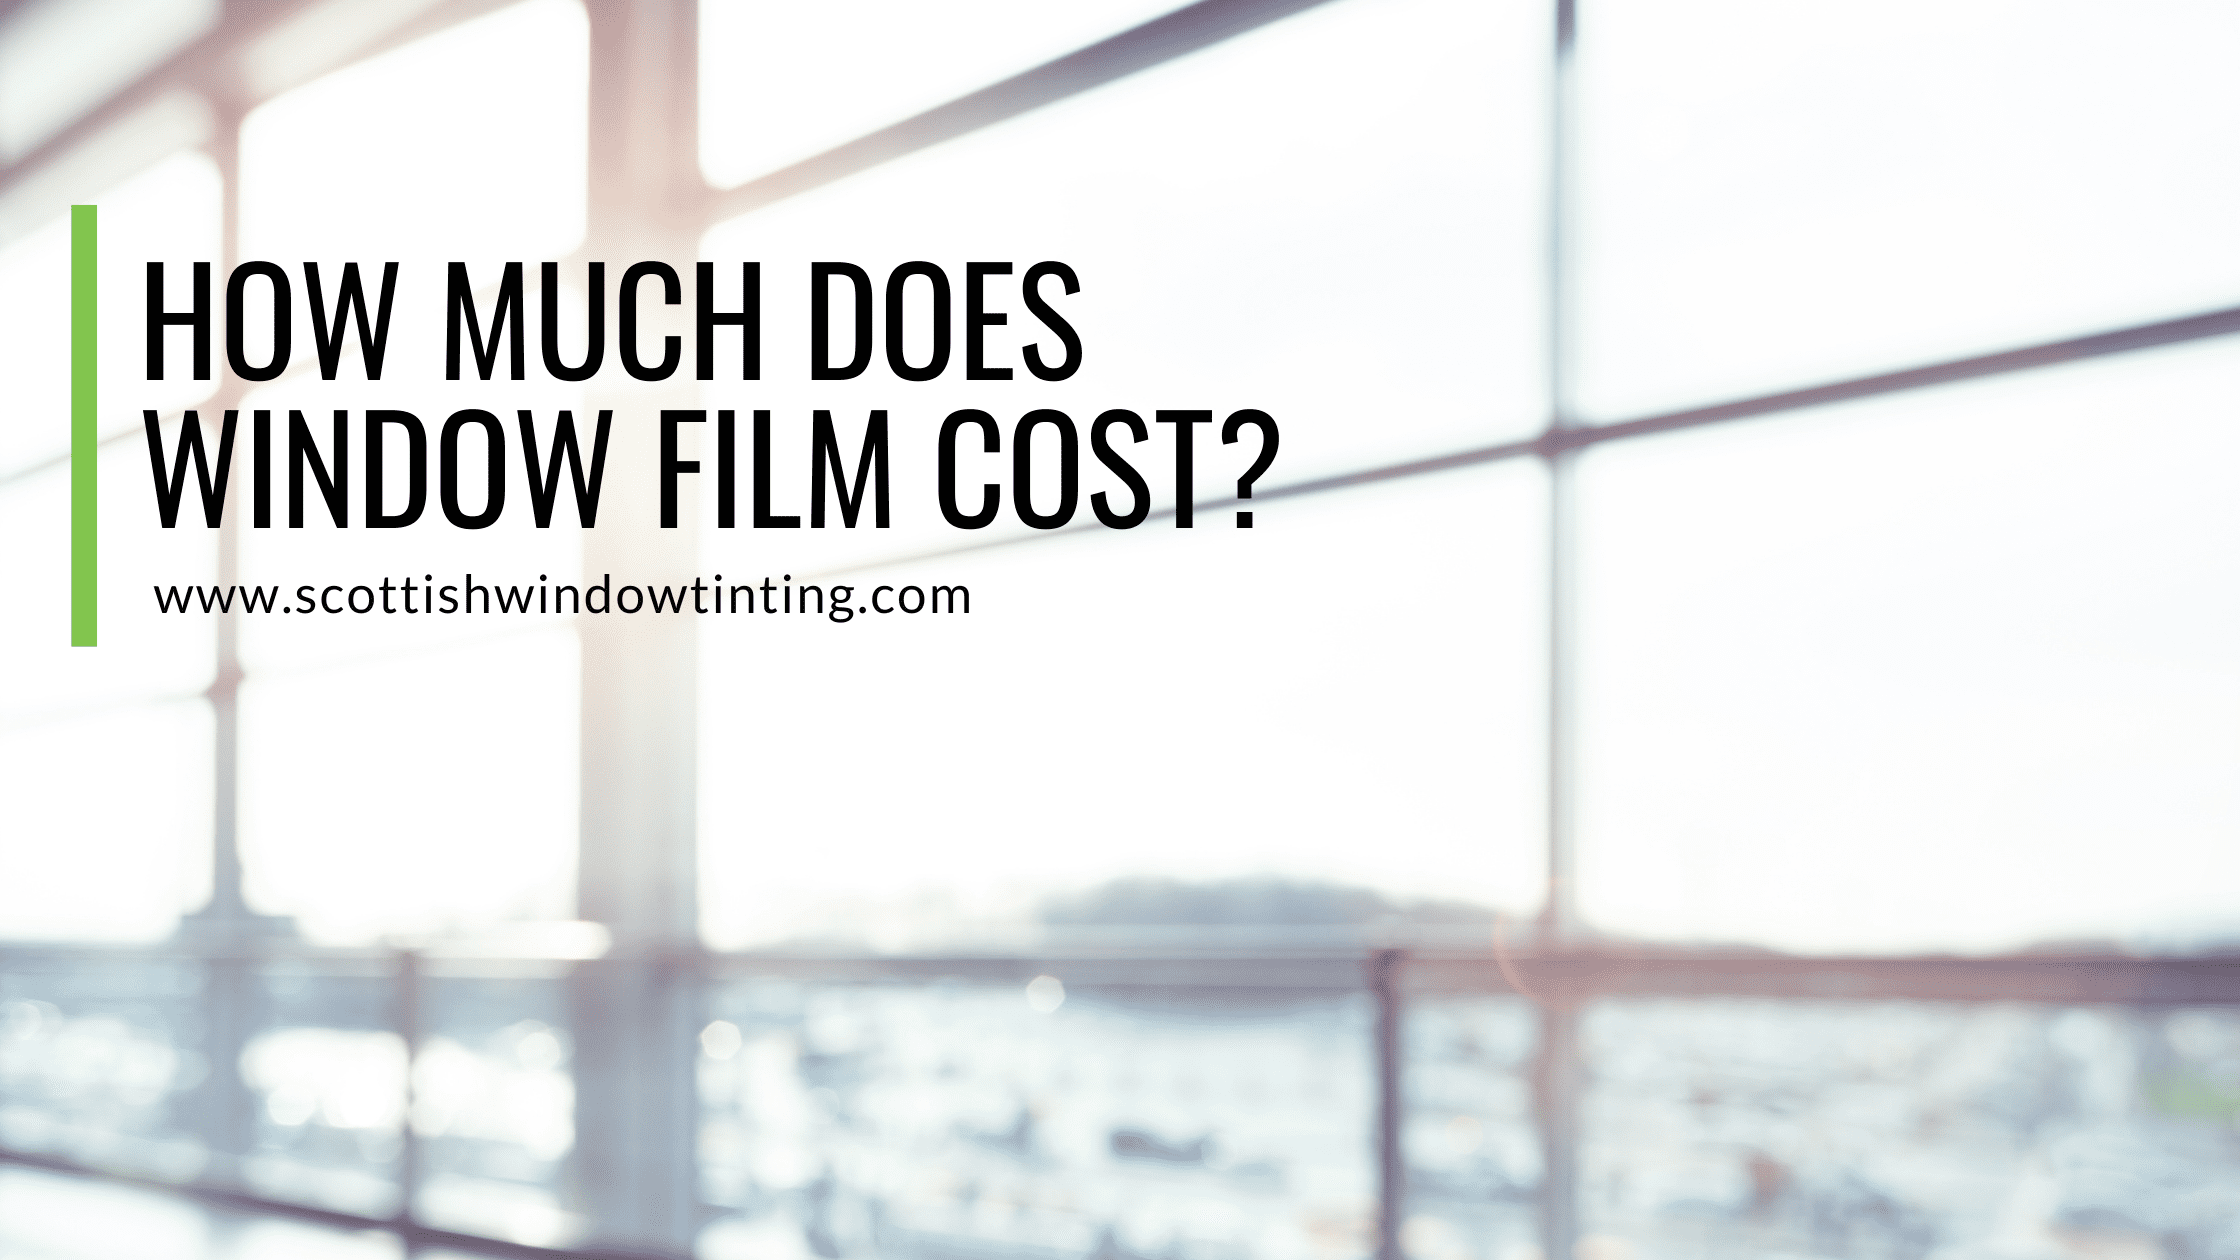 How Much Does Window Film Cost?